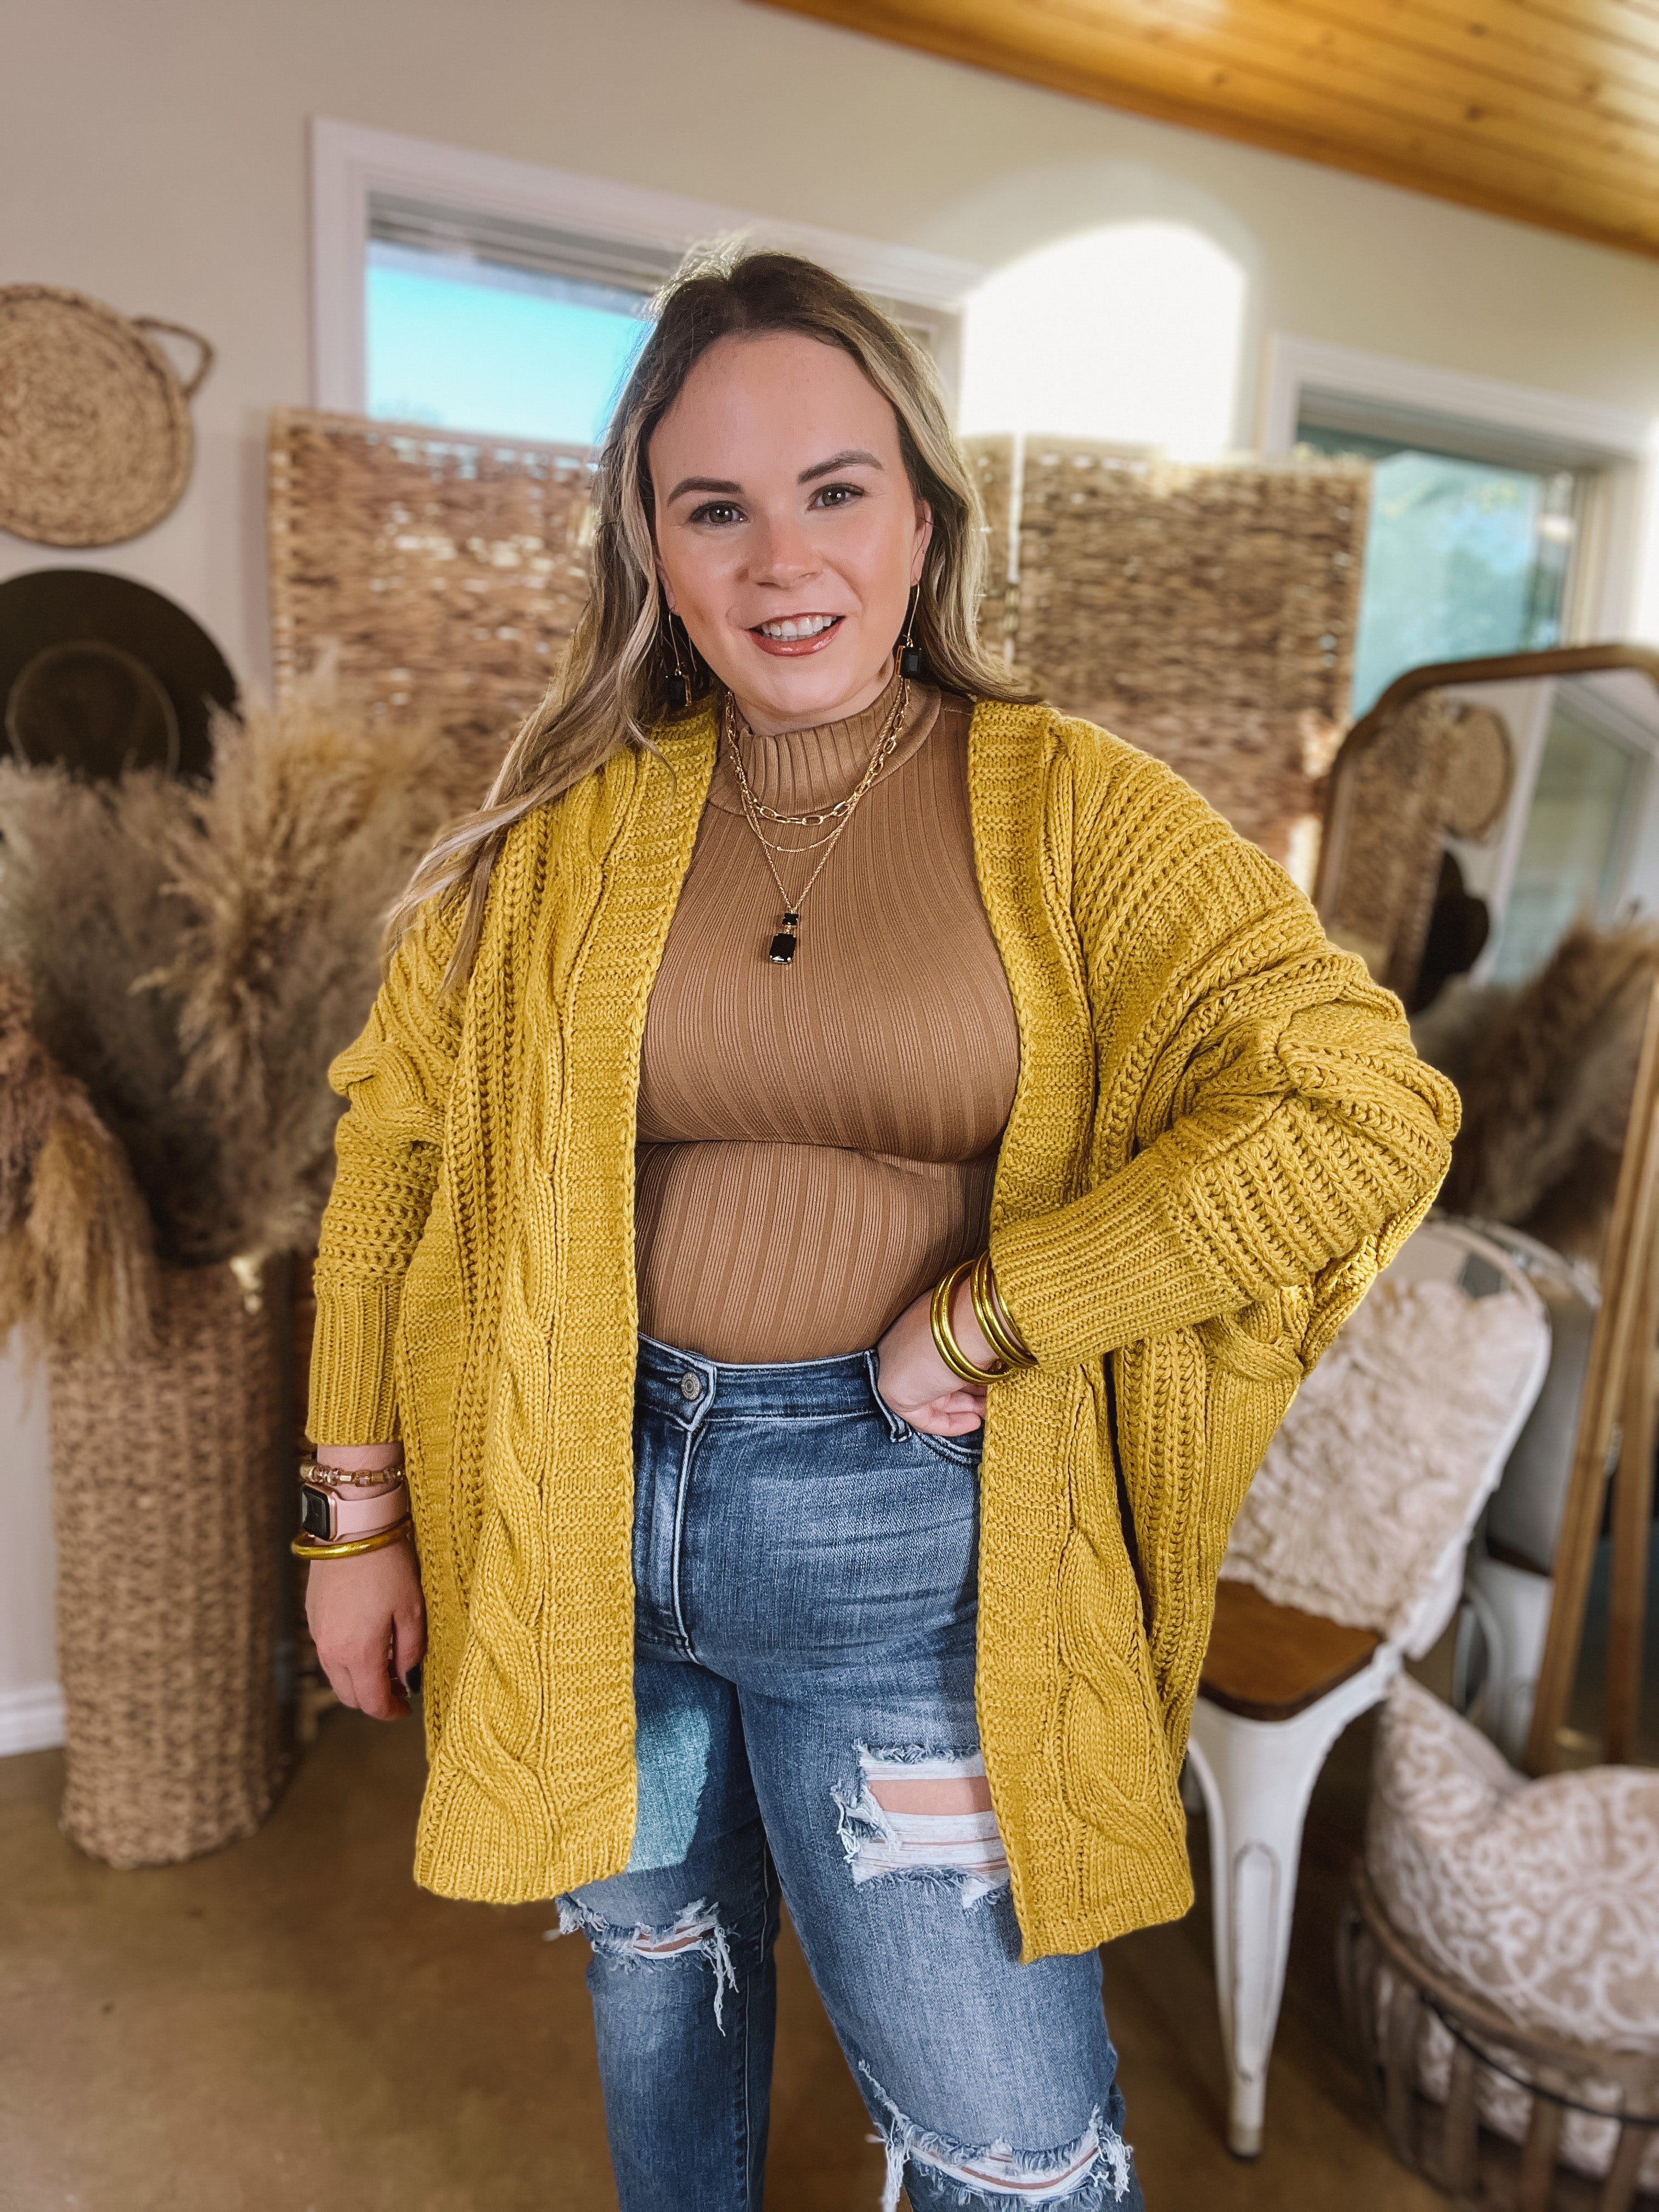 Caramel Spice Kisses Long Sleeve Dolman Cardigan in Mustard Yellow - Giddy Up Glamour Boutique